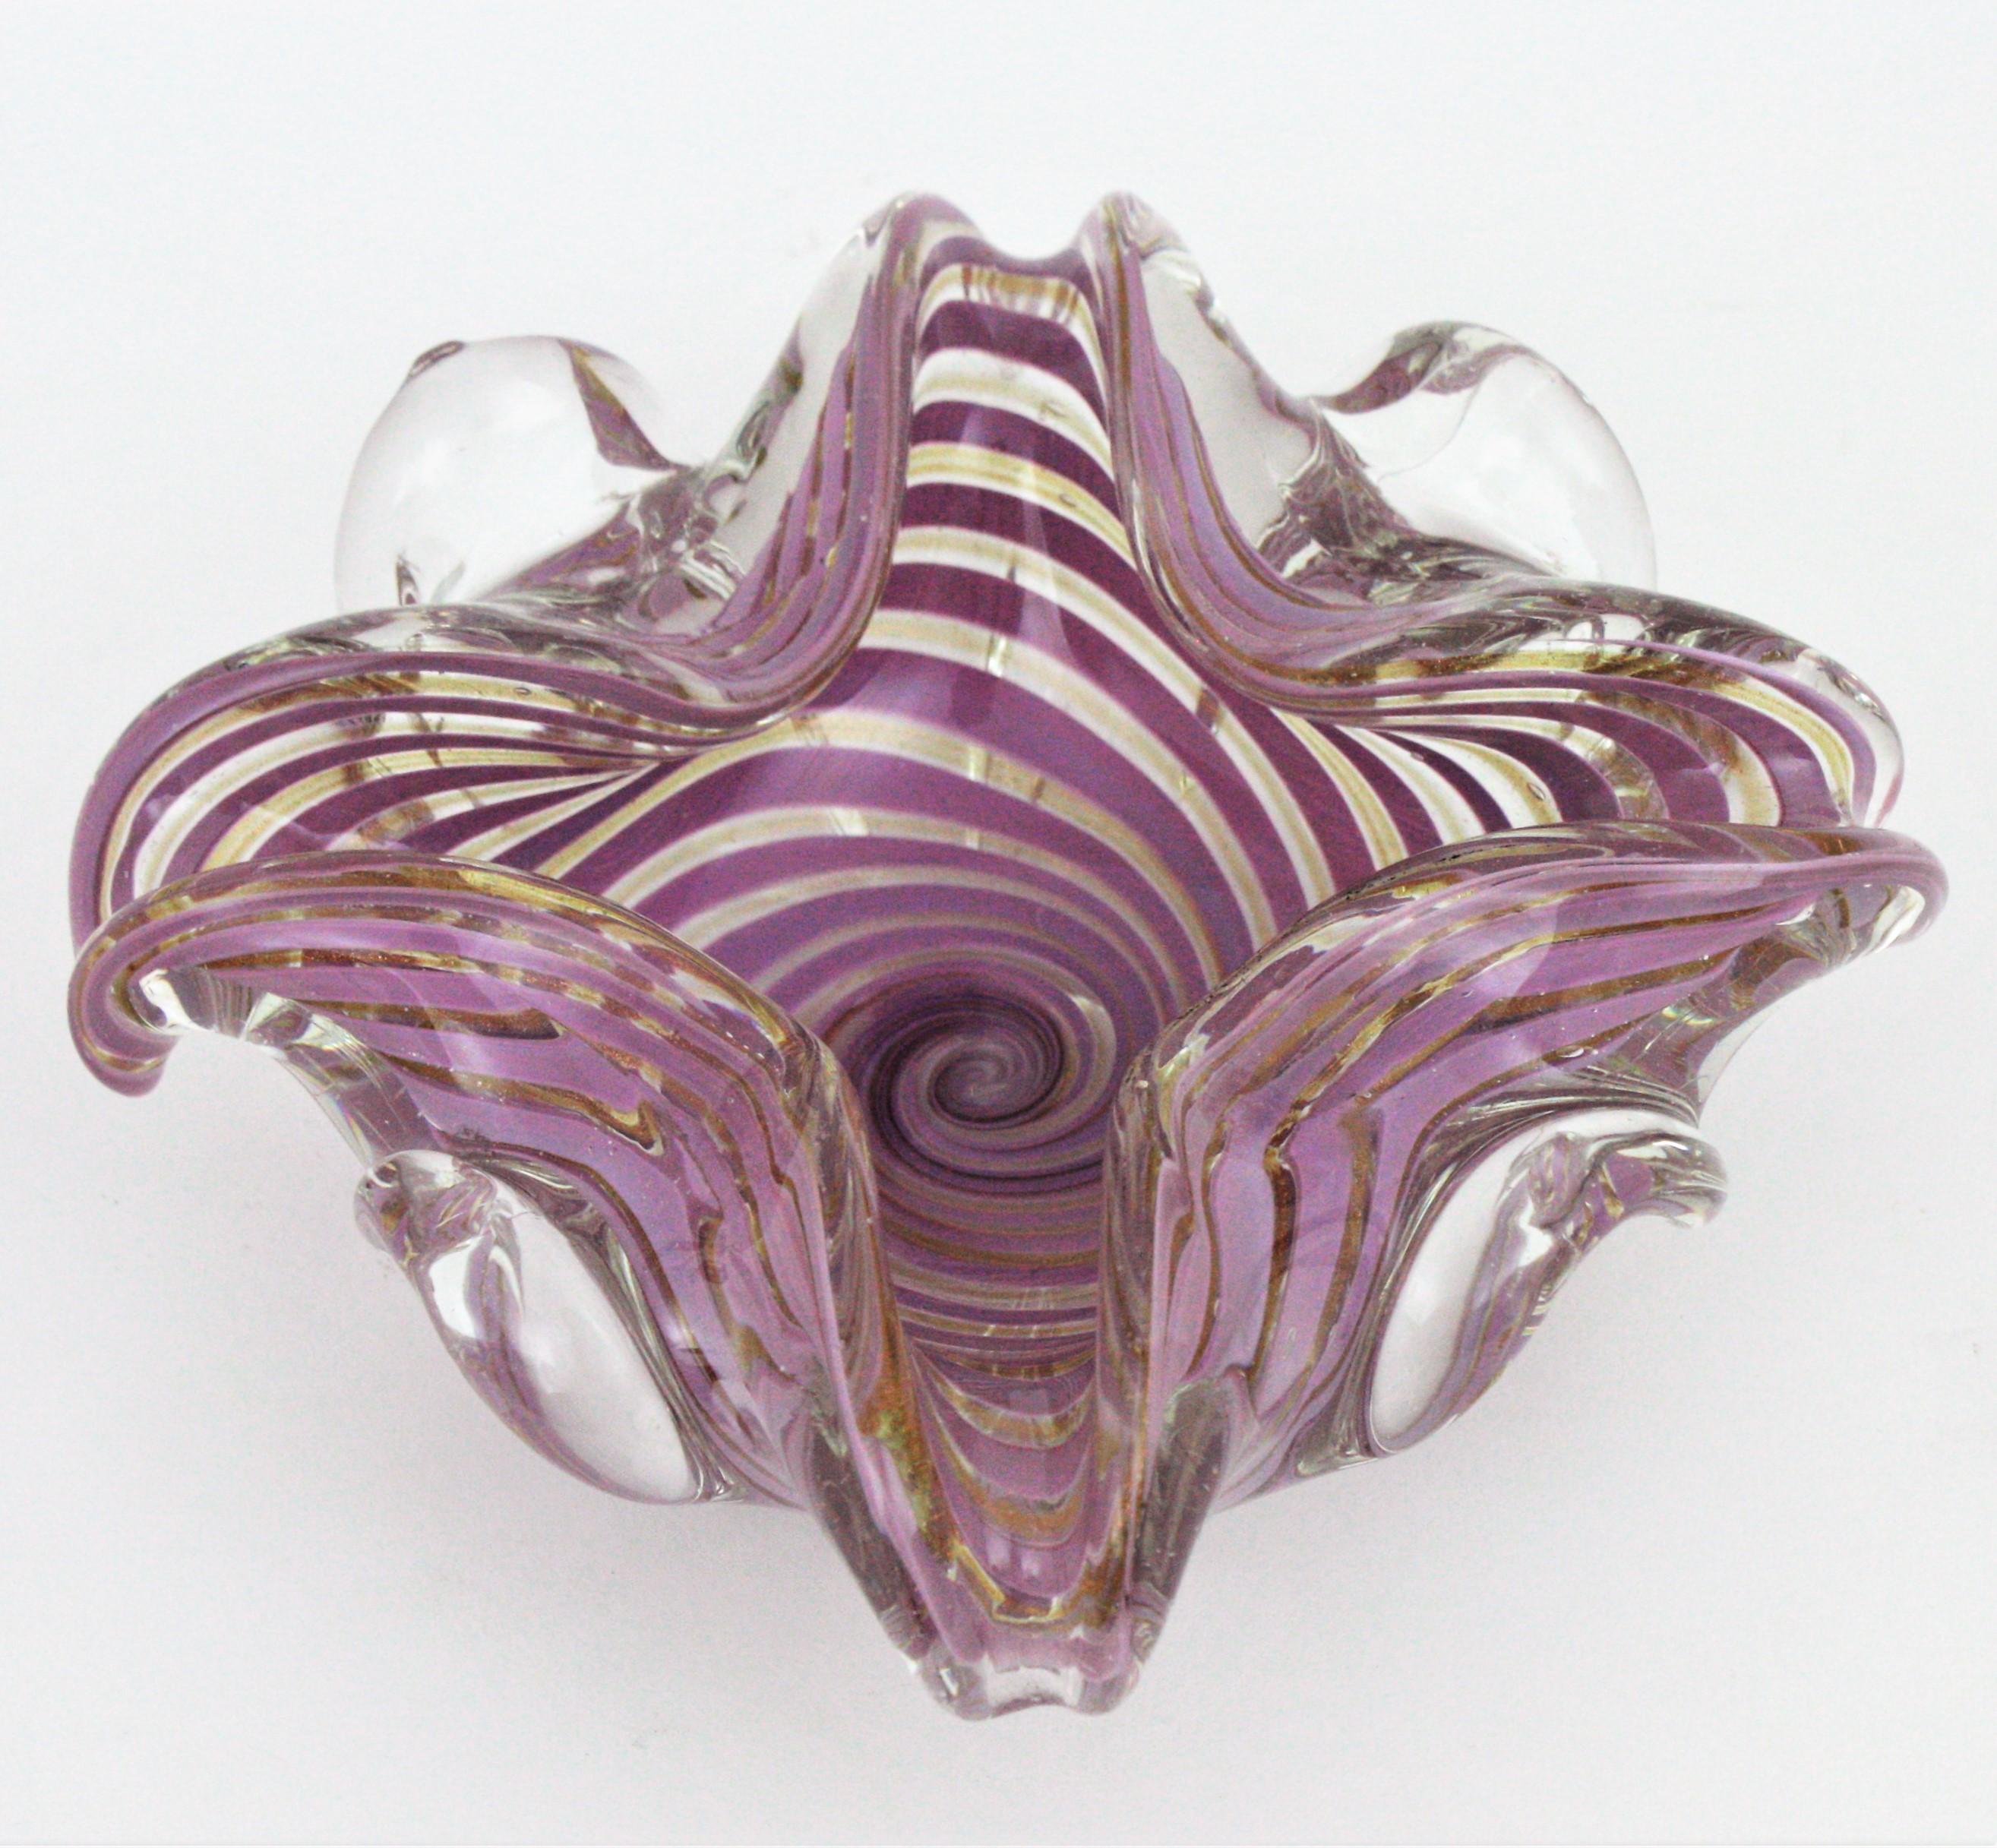 Fratelli Toso Murano Glass Lilac Swirl Ribbons & Gold Dust Large Bowl / Ashtray en vente 6